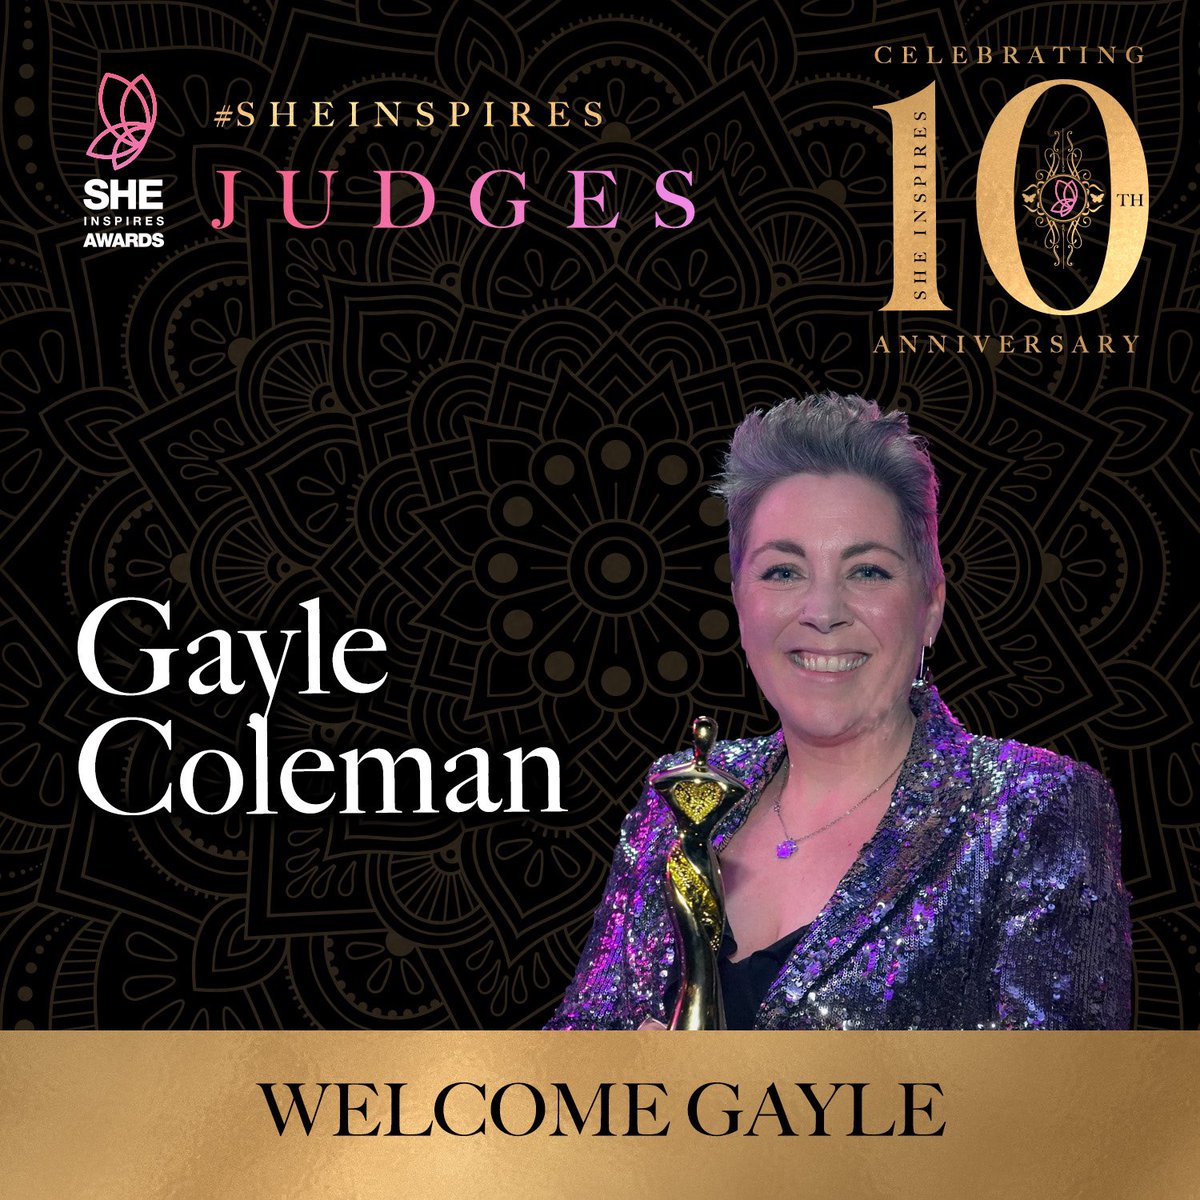 🎉 #MeetOurJudges Gayle Coleman, winner of the 2023 Food, Hospitality, and Events award! From trumpet player to award-winning baker, her journey with Old Soul Bakery is inspiring. Let's celebrate her commitment to sustainability, community support, and delicious treats!